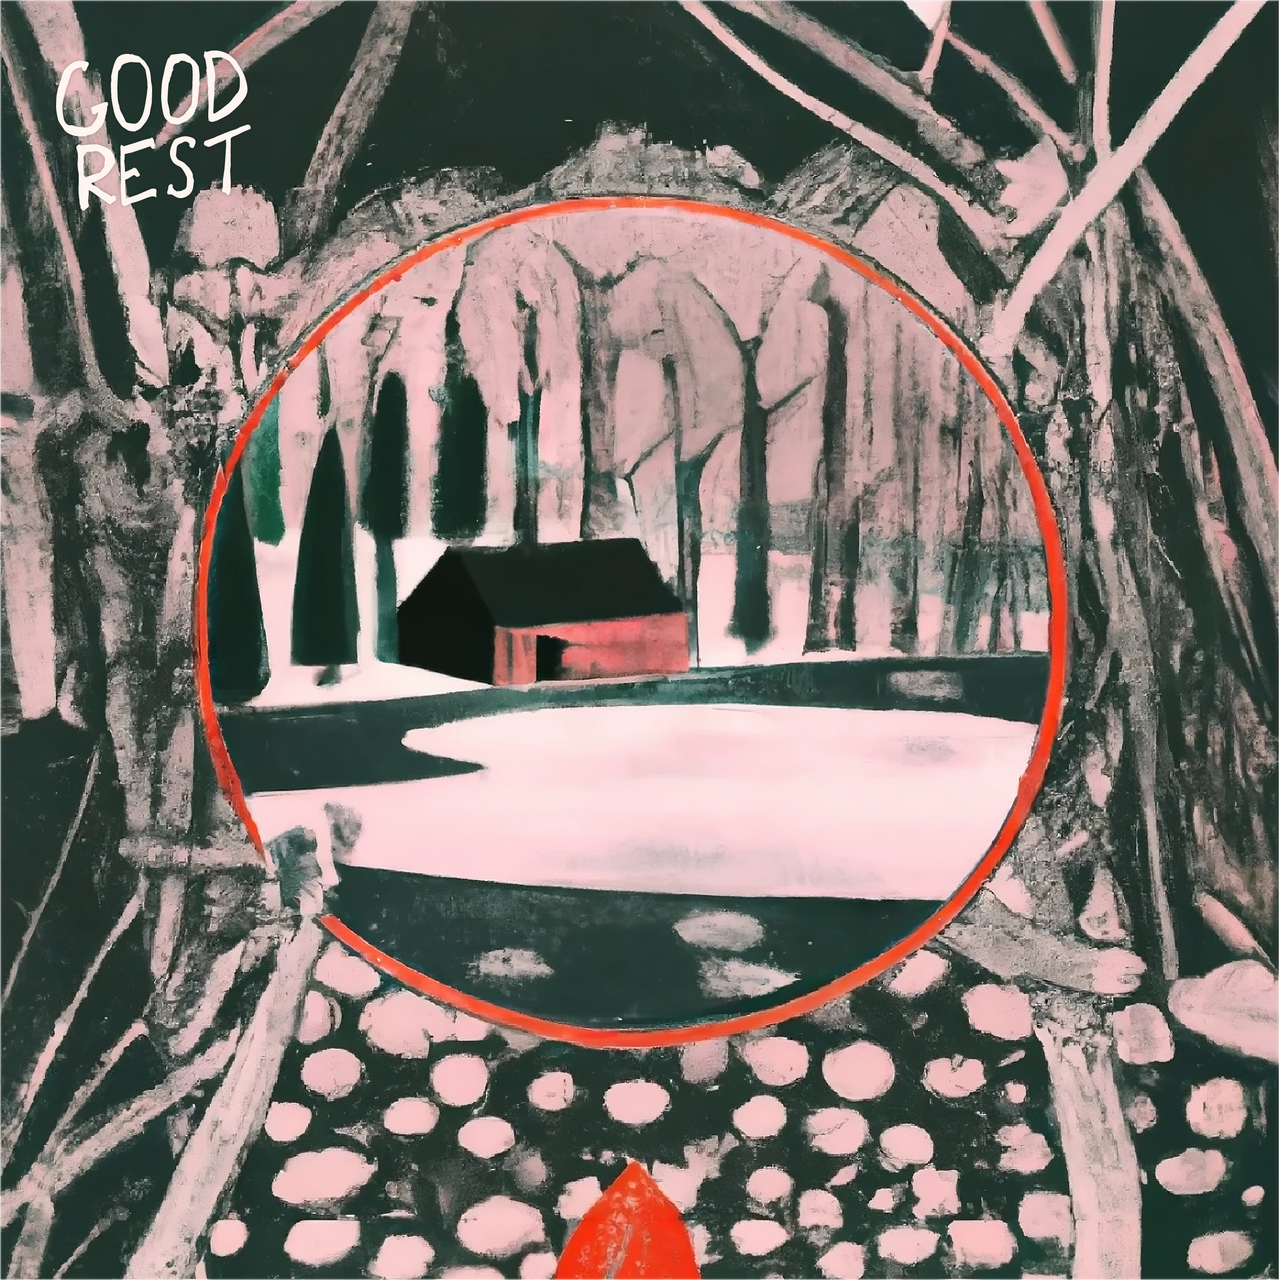 Vacation cover art - a cabin in front of a frozen lake, surrounded by a black border with white tree roots. Charcoal drawing style collage.